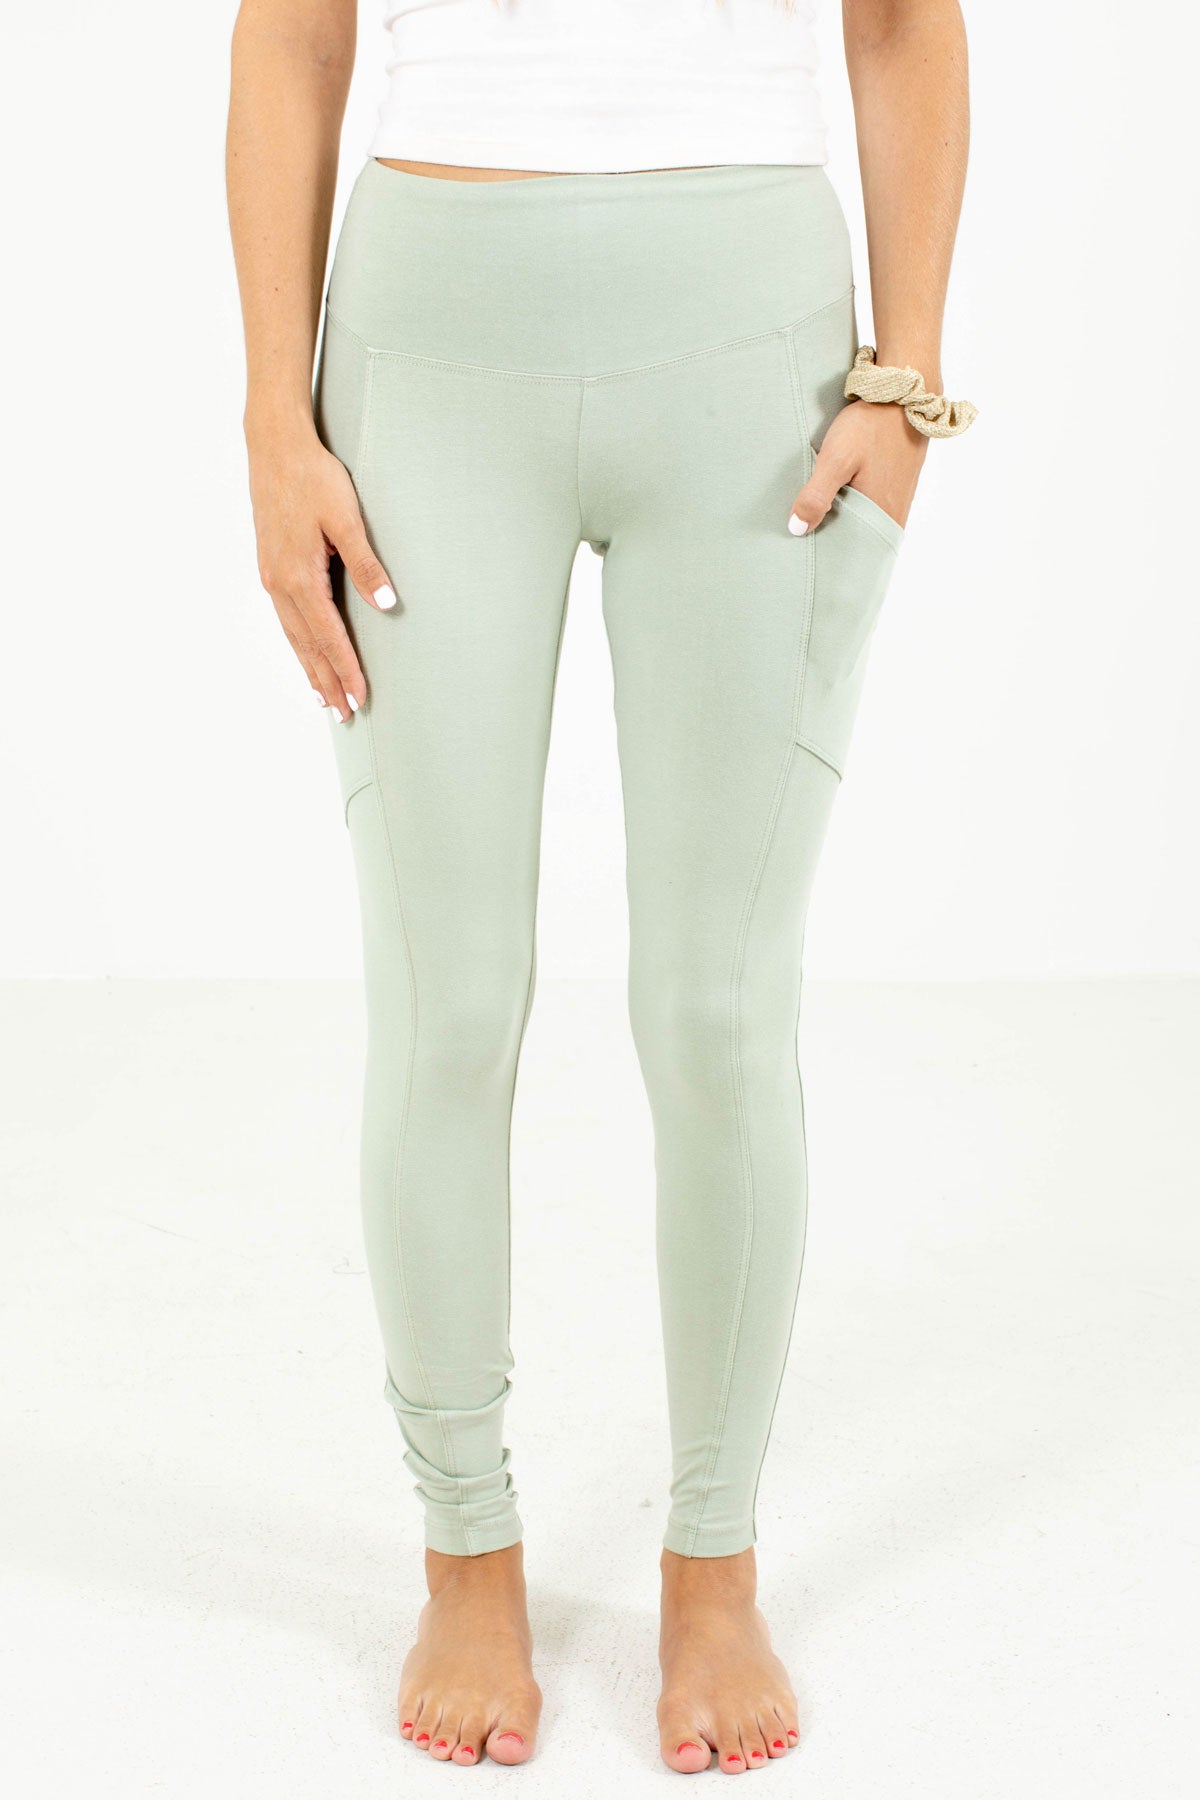 Sage Green Cute and Comfortable Boutique Leggings for Women